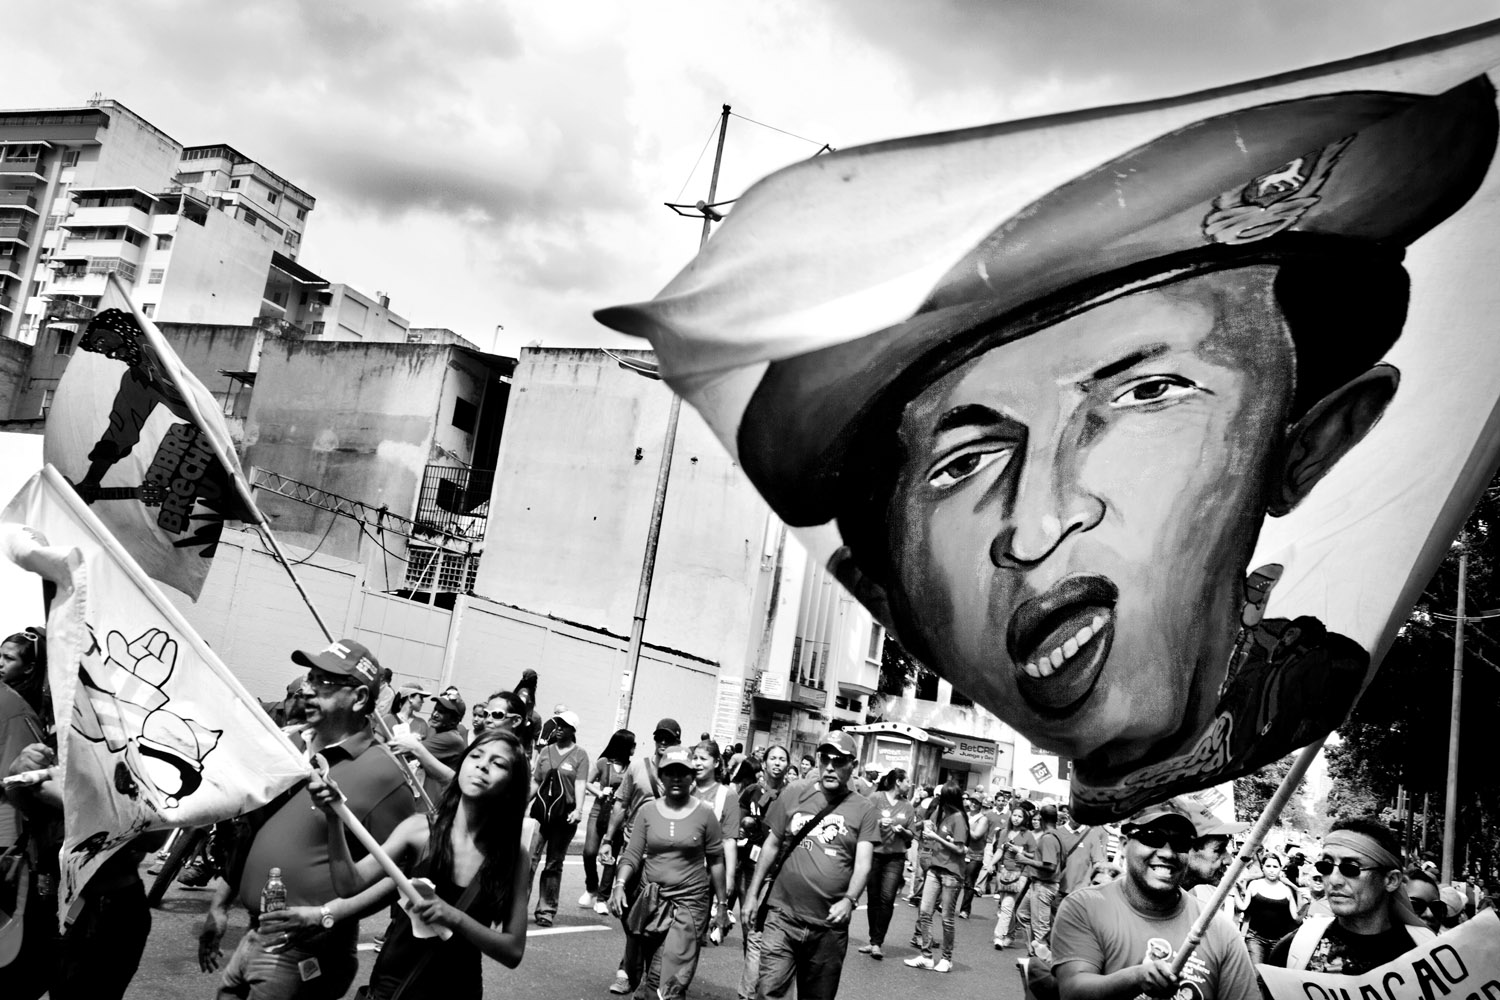 Abrebrecha  Collective members rally on May 1, together with hundreds of thousands of partisans, to show their support for President Hugo Chavez and the recently approved Organic Work Law, which they see as a step toward workers' rights and justice.